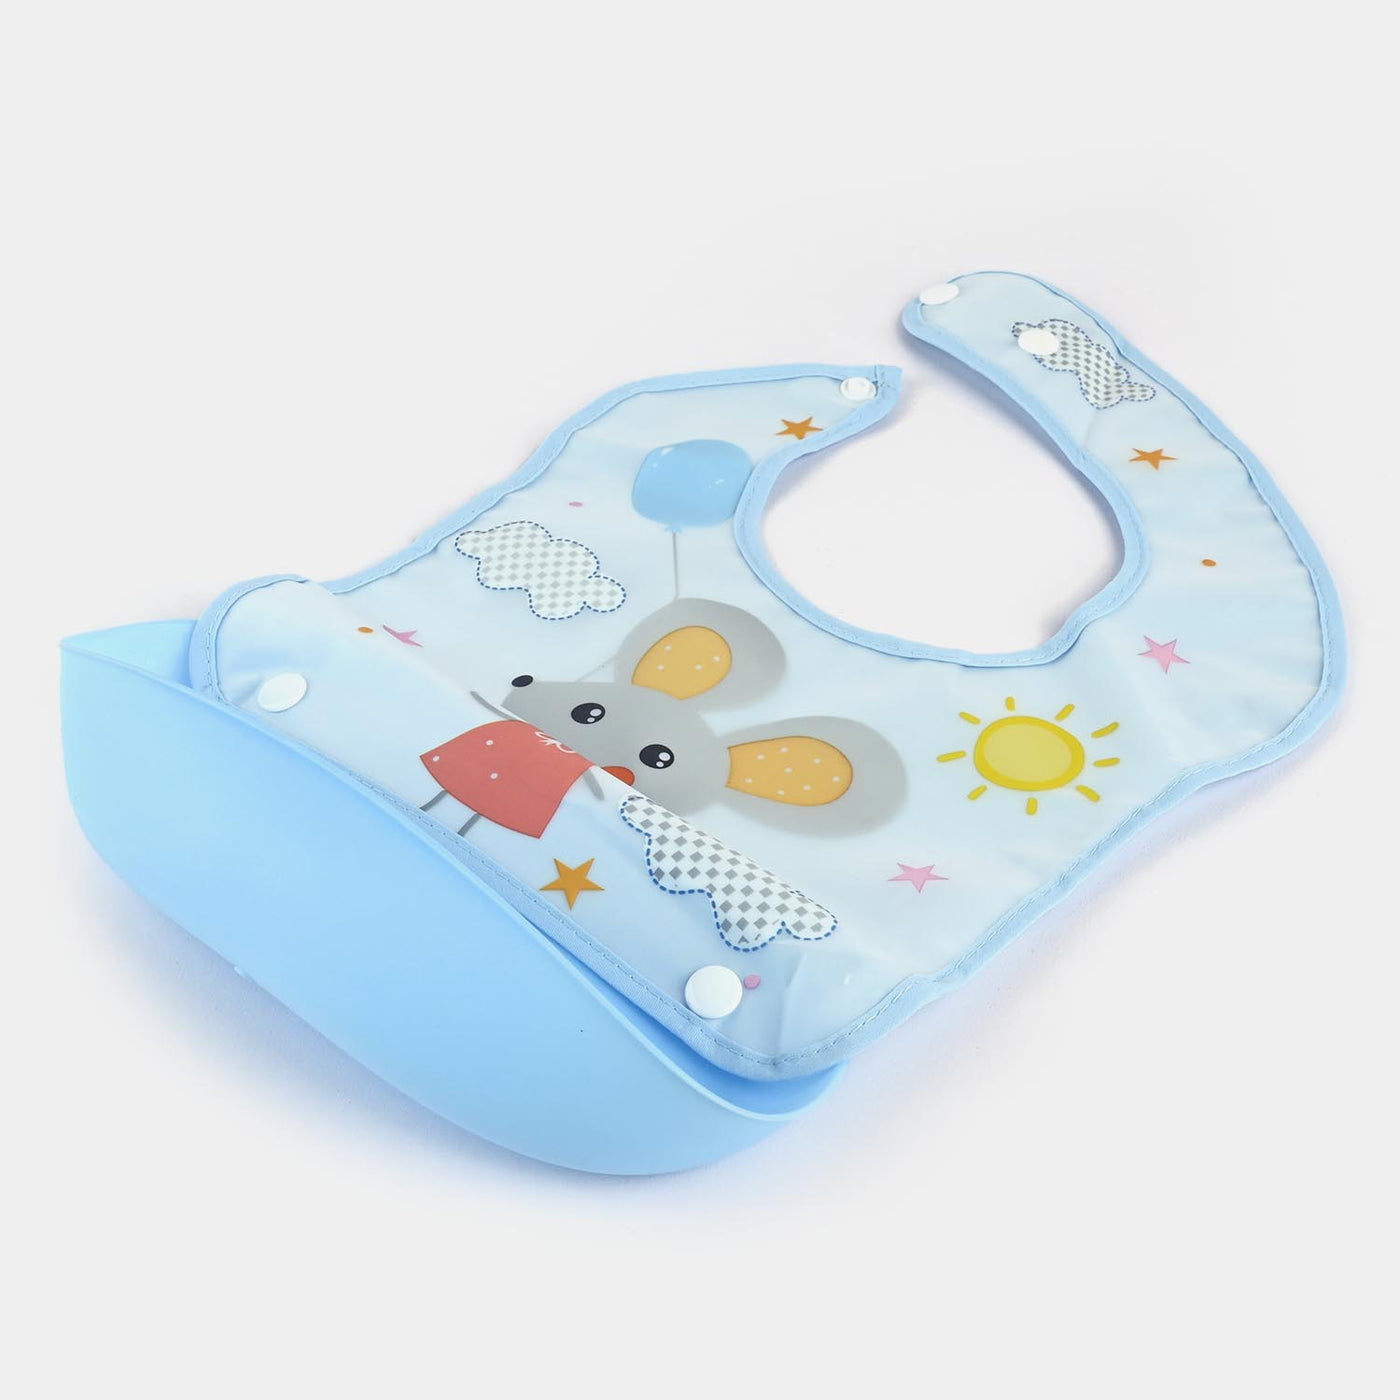 PLASTIC BIB WITH HOLDER FOR BABIES - BLUE